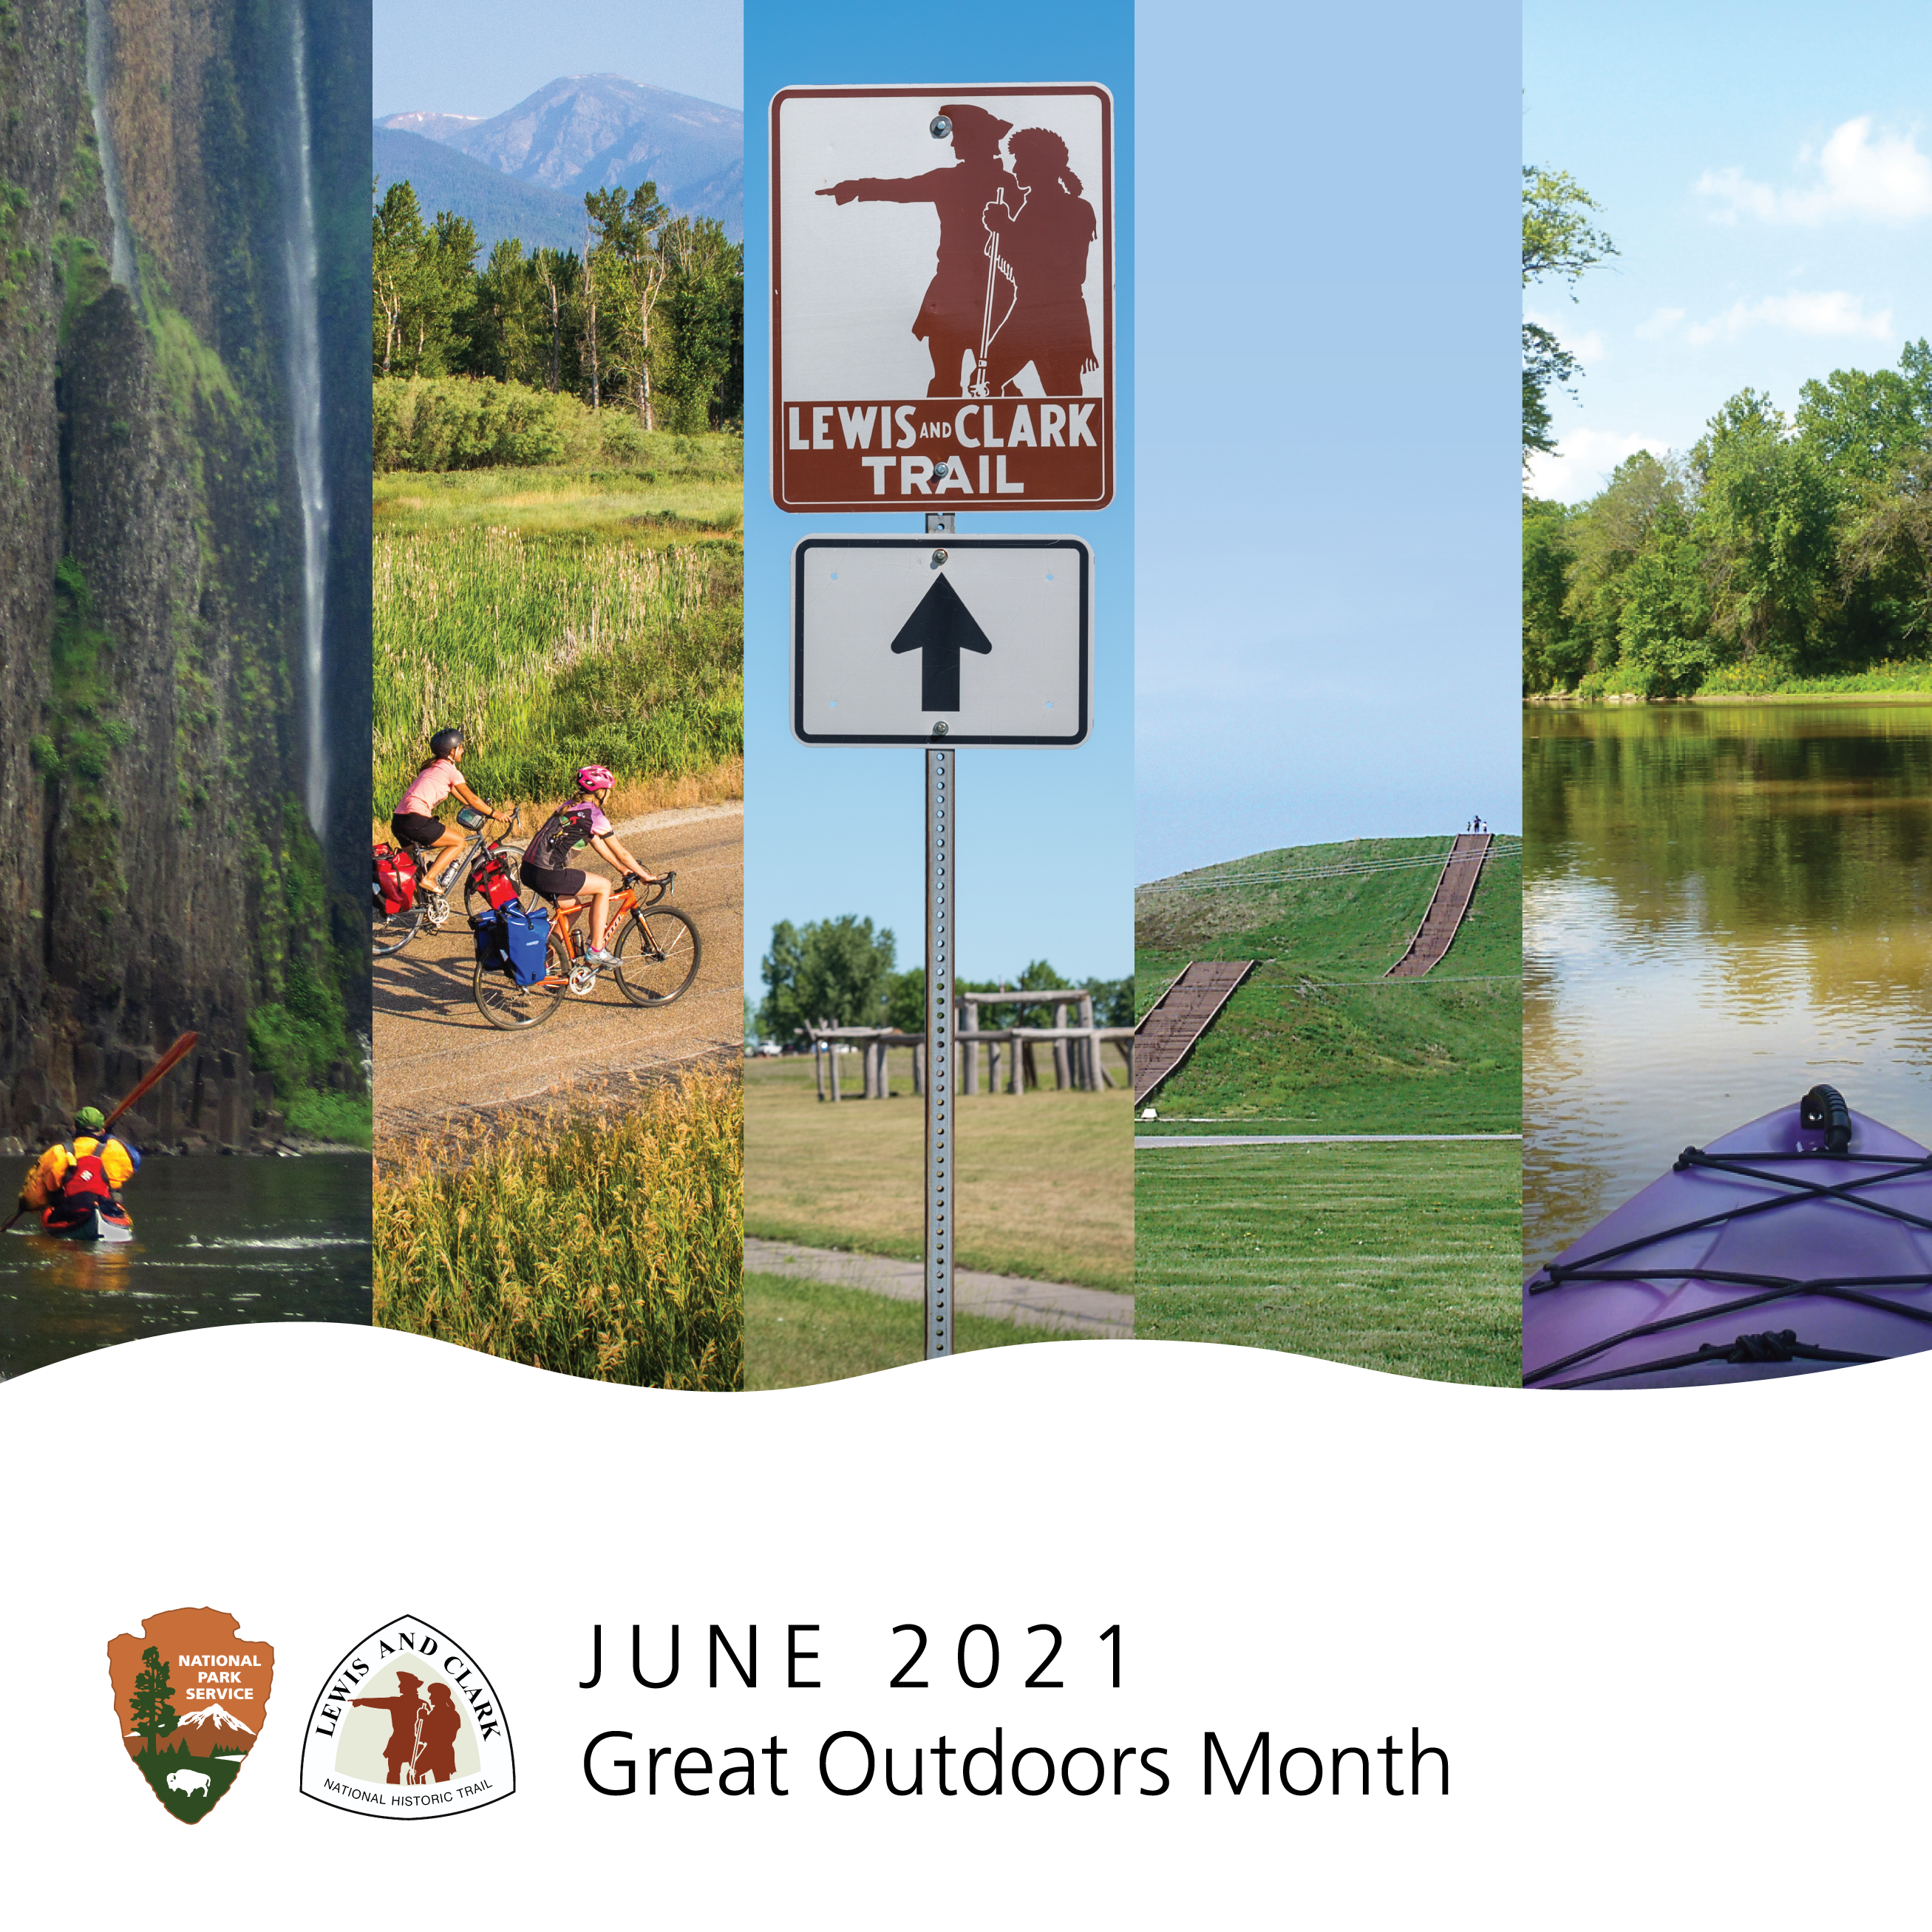 June 2021. Great Outdoors Month. Photos of a kayaker near a waterfall, two cyclists in mountain pass, Lewis and Clark Trail Highway sign, earthen mounds with walkway, and canoe on a forested river. National Park Service Logo. Lewis and Clark Trail logo.